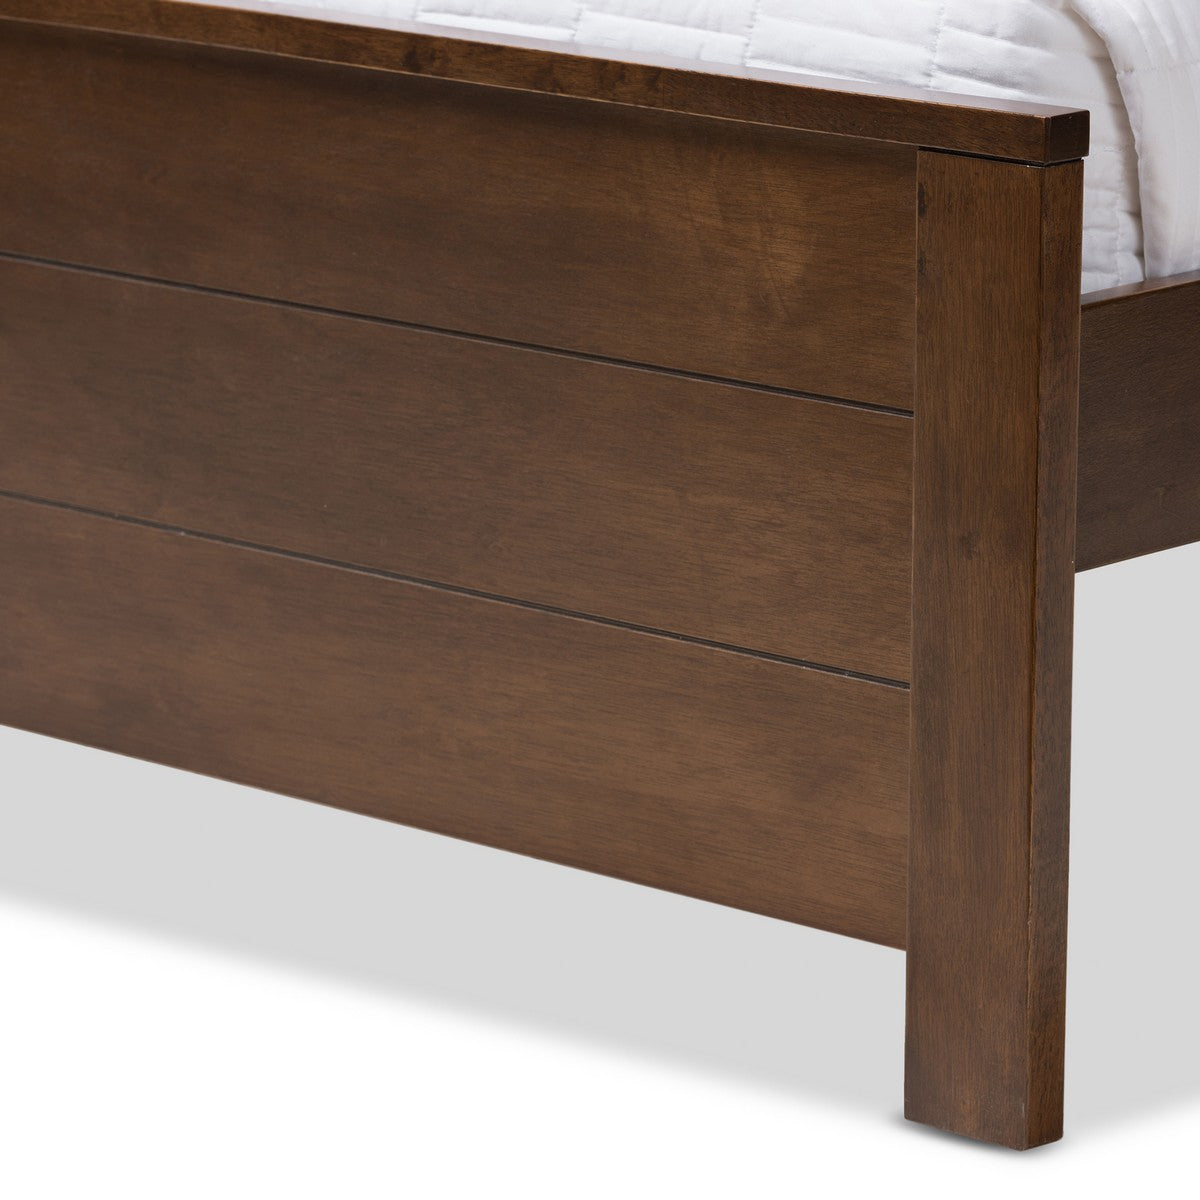 Baxton Studio Catalina Modern Classic Mission Style Brown-Finished Wood Twin Platform Bed